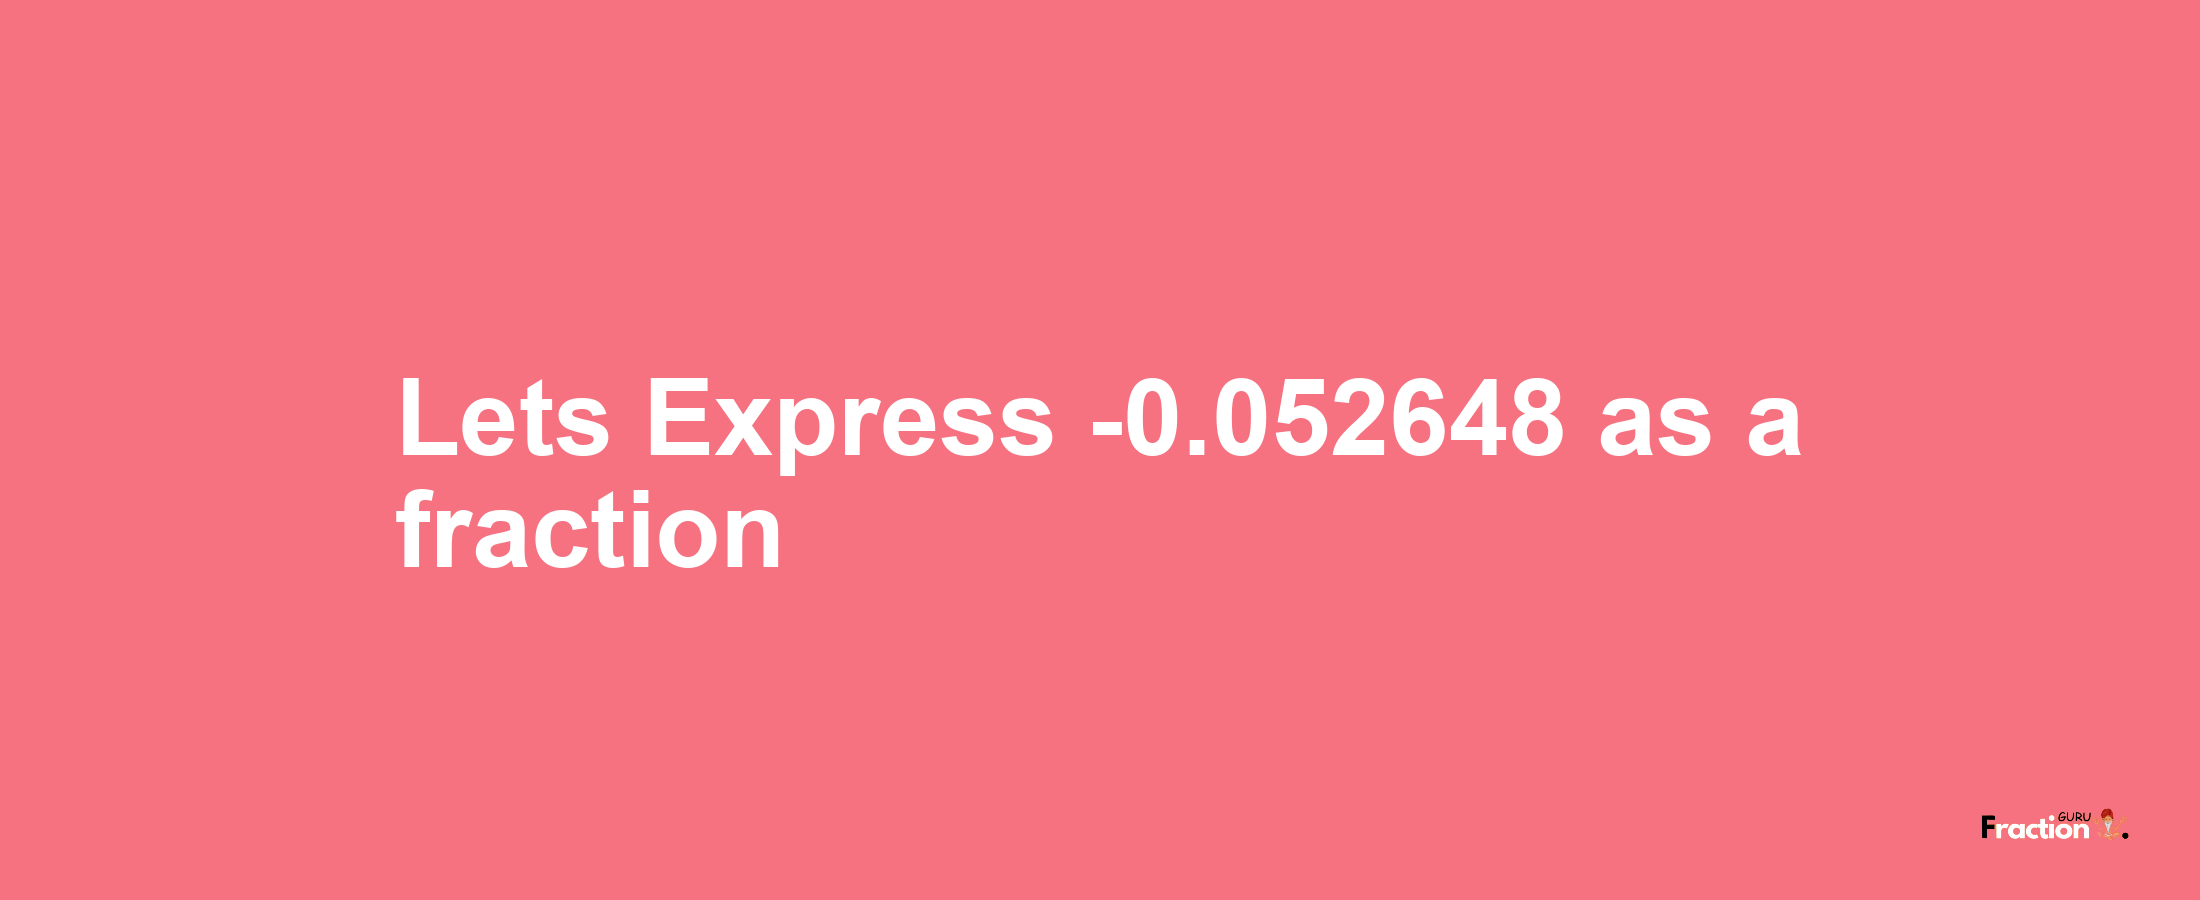 Lets Express -0.052648 as afraction